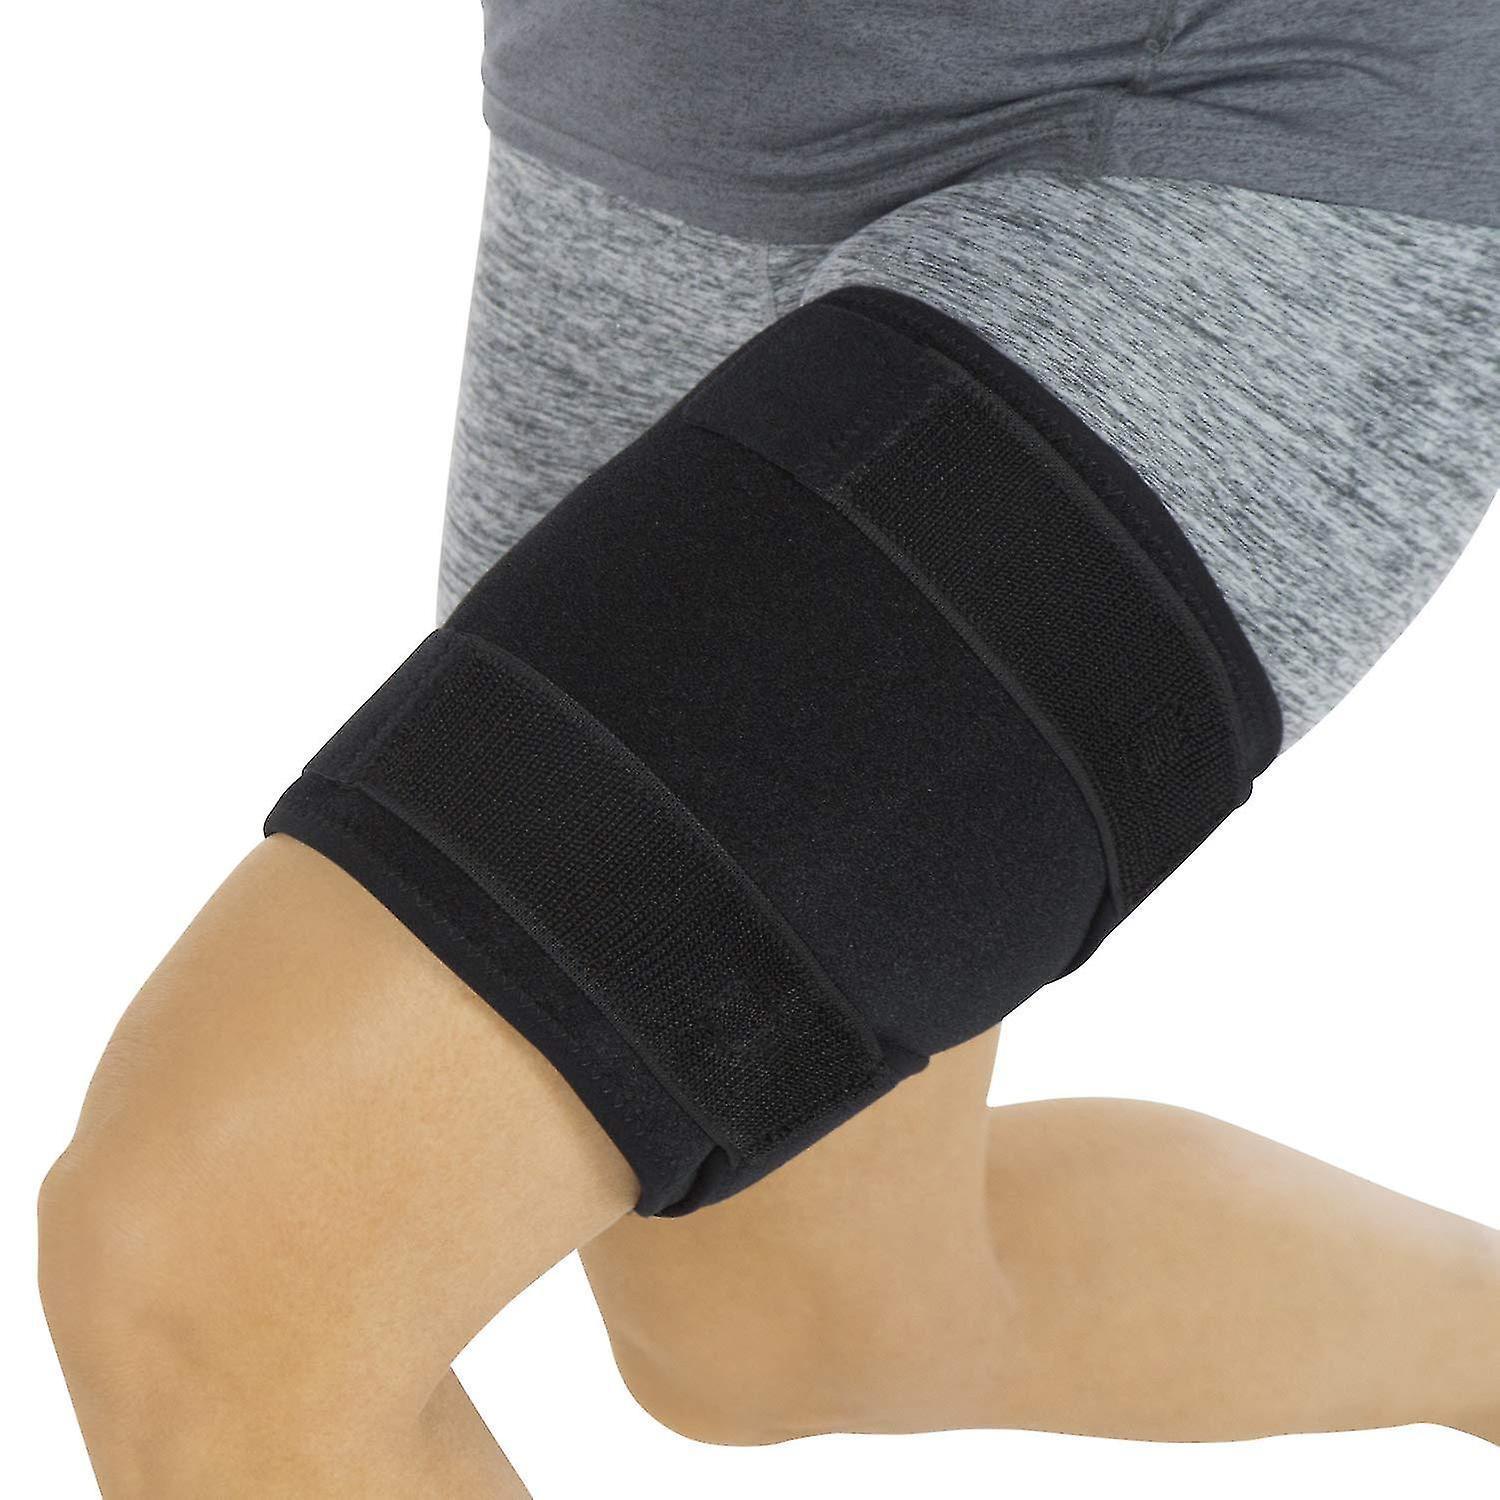 Thigh Brace - Hamstring Quad Wrap - Adjustable Compression Sleeve Support For Pulled Groin Muscle, Sprains, Quadricep, Tendinitis, Workouts, Sciatica